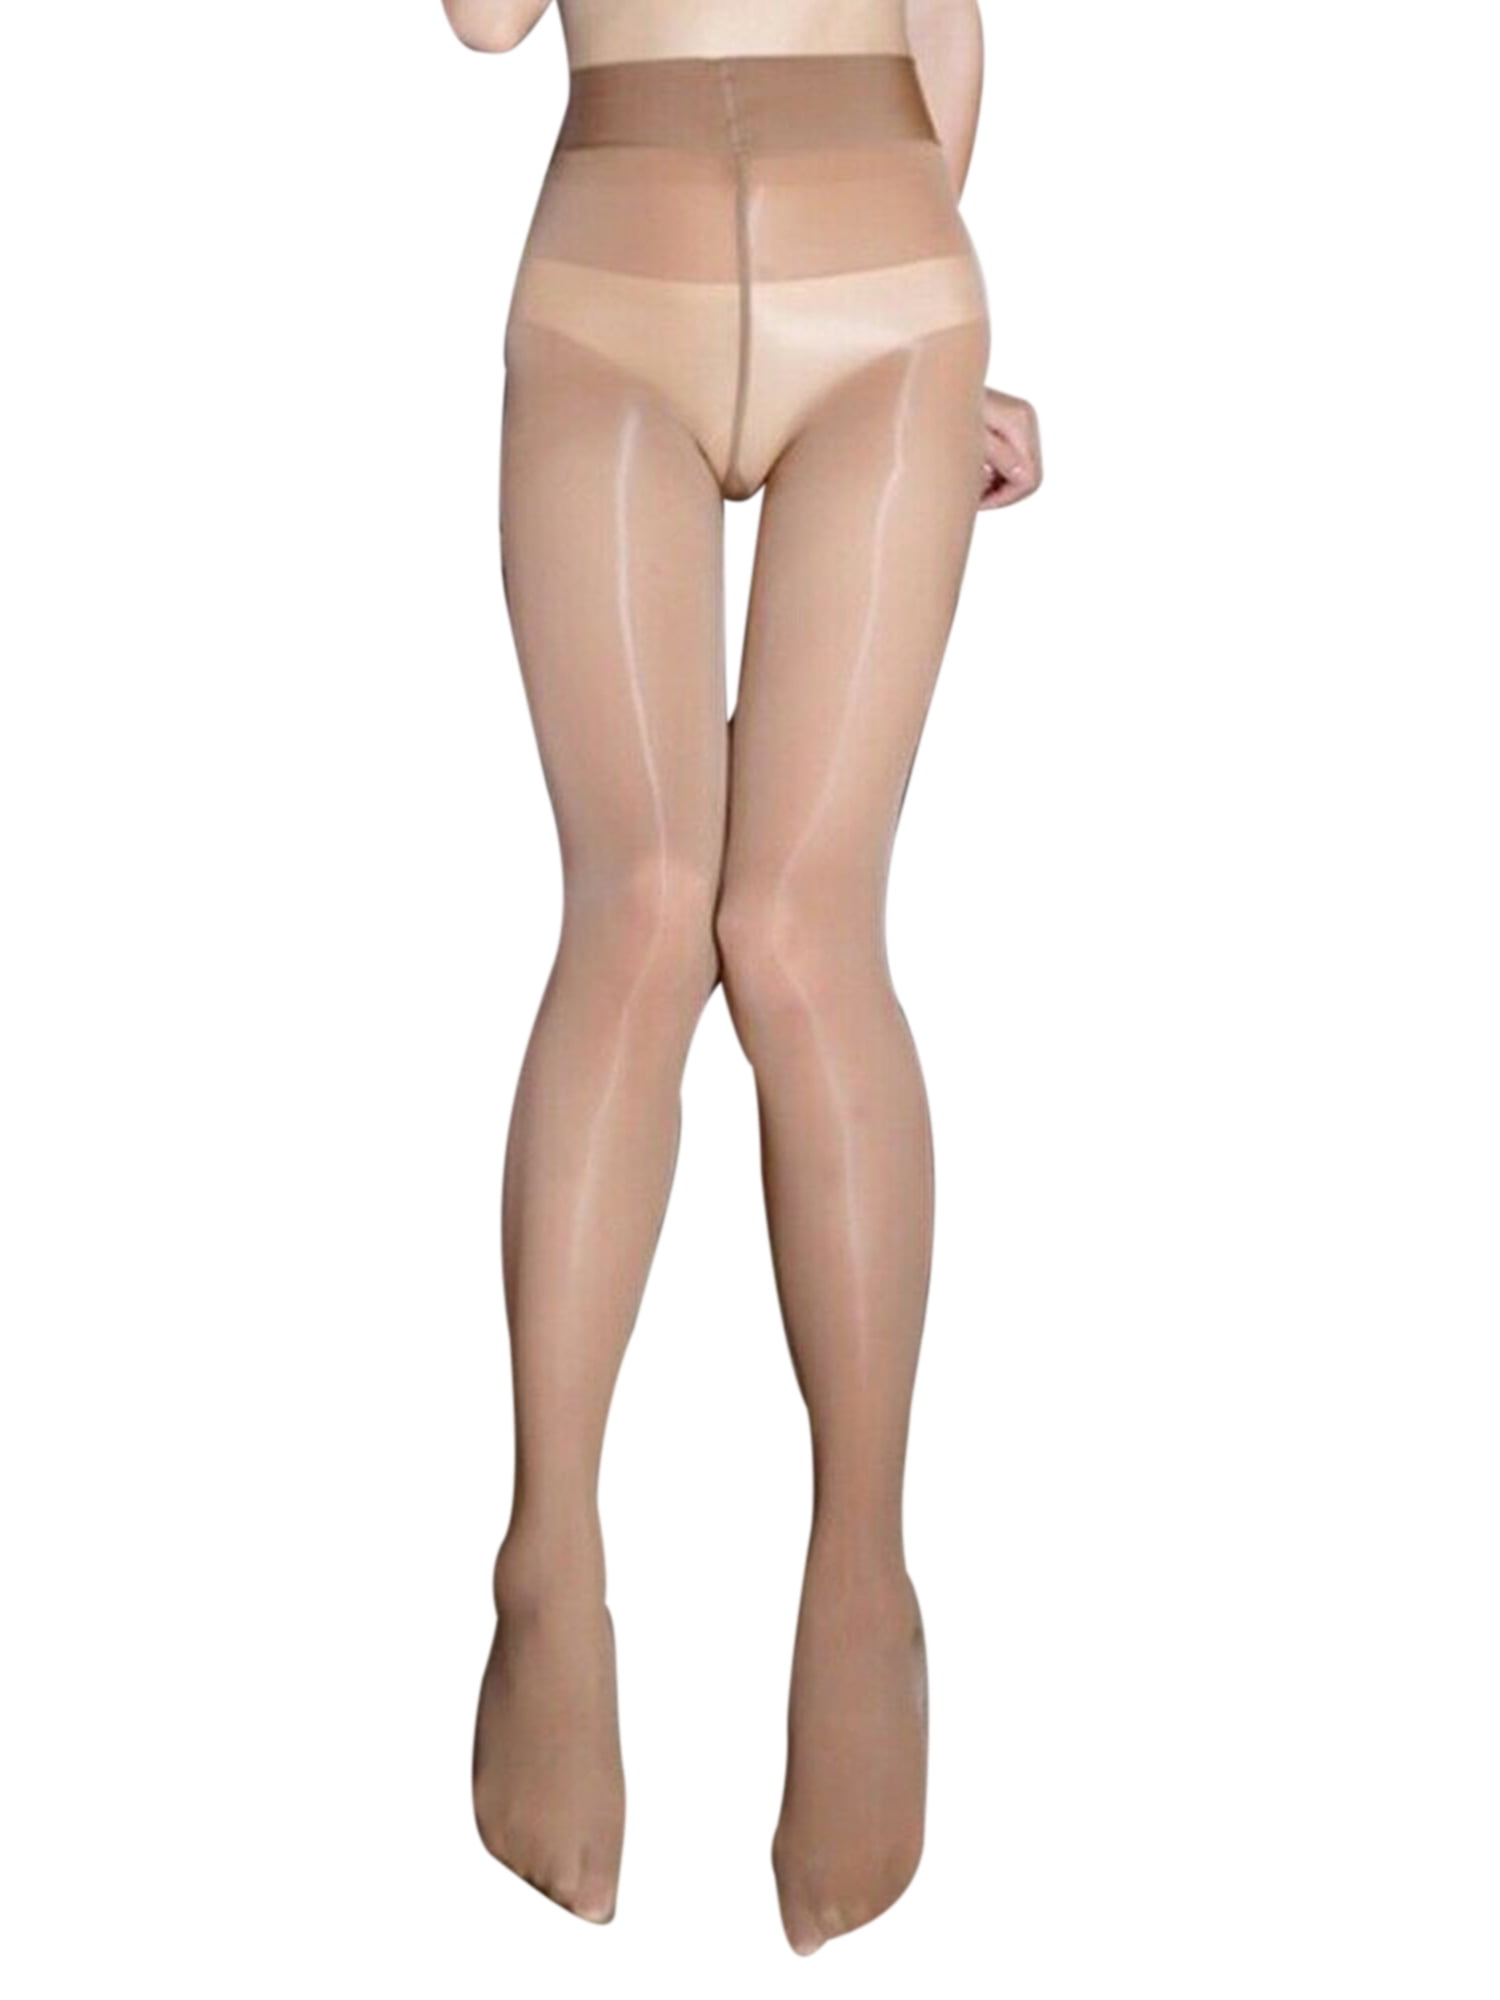 Manzi 2 Pairs Shiny Pantyhose,15D Slimming High Waist Sheer Oil Shimmery  Tights for Women 